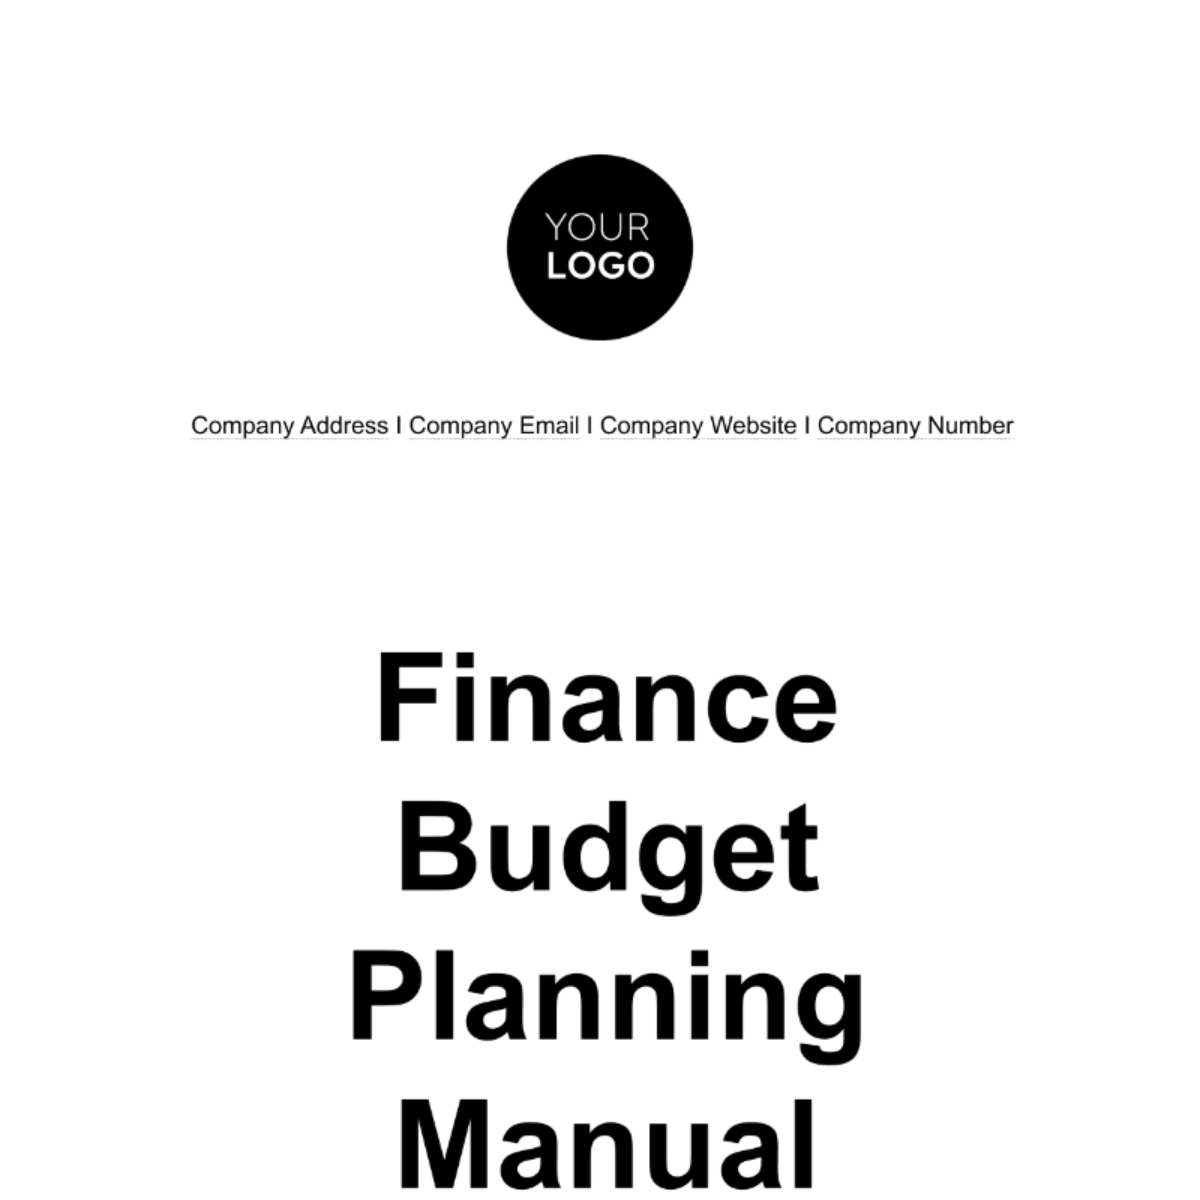 Finance Budget Planning Manual Template